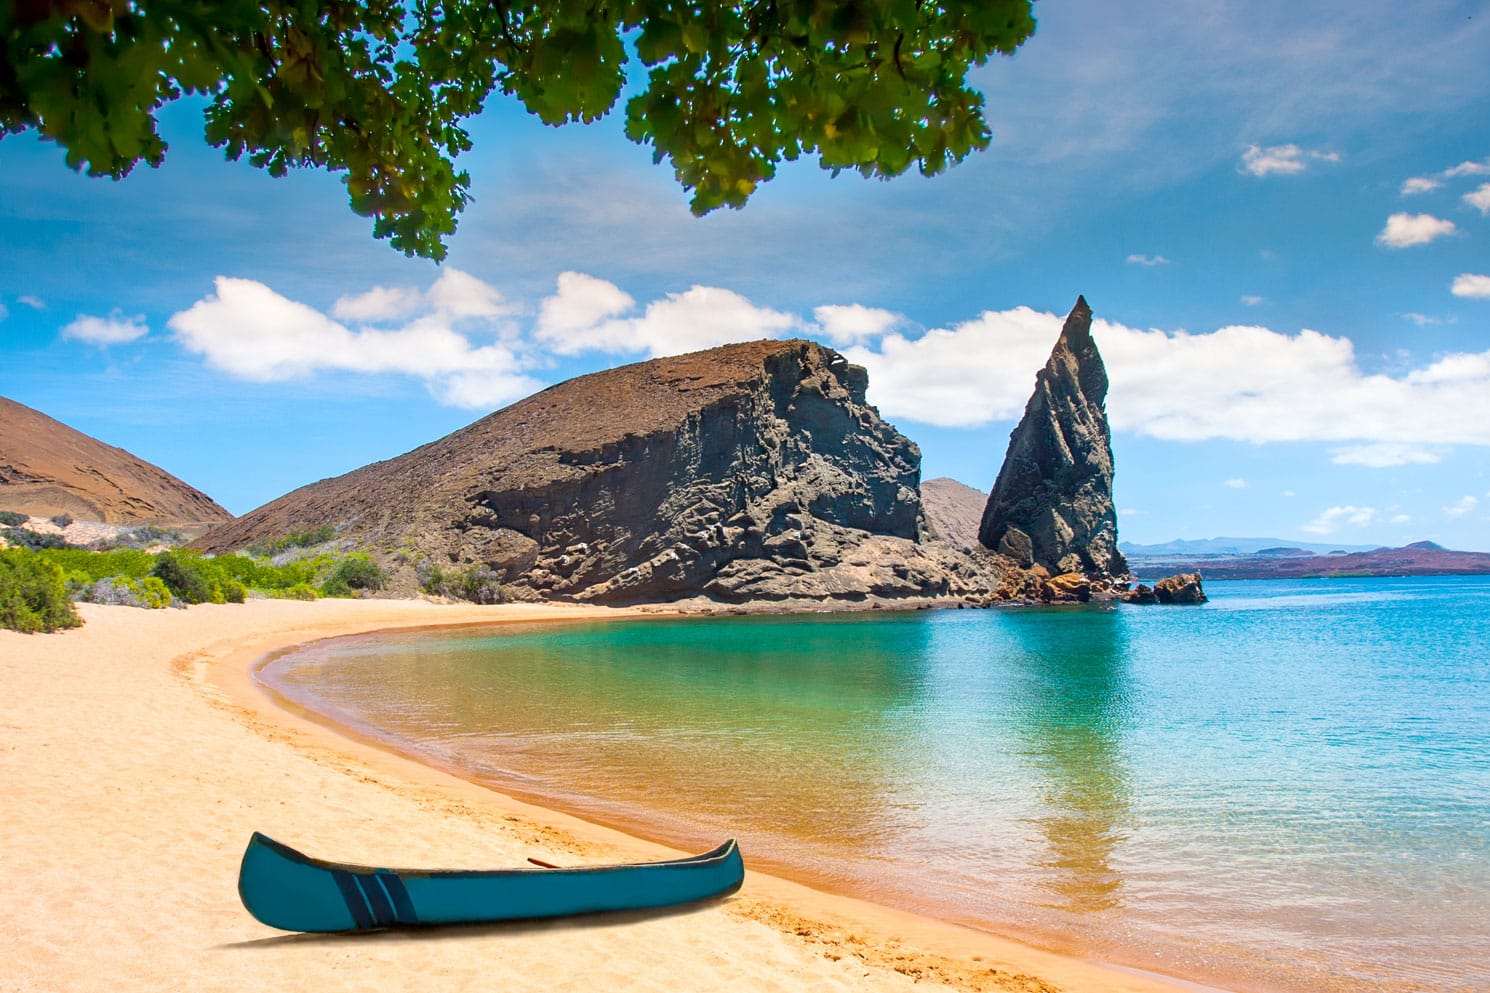 Beach and a Boat - Galapagos Luxury Cruises